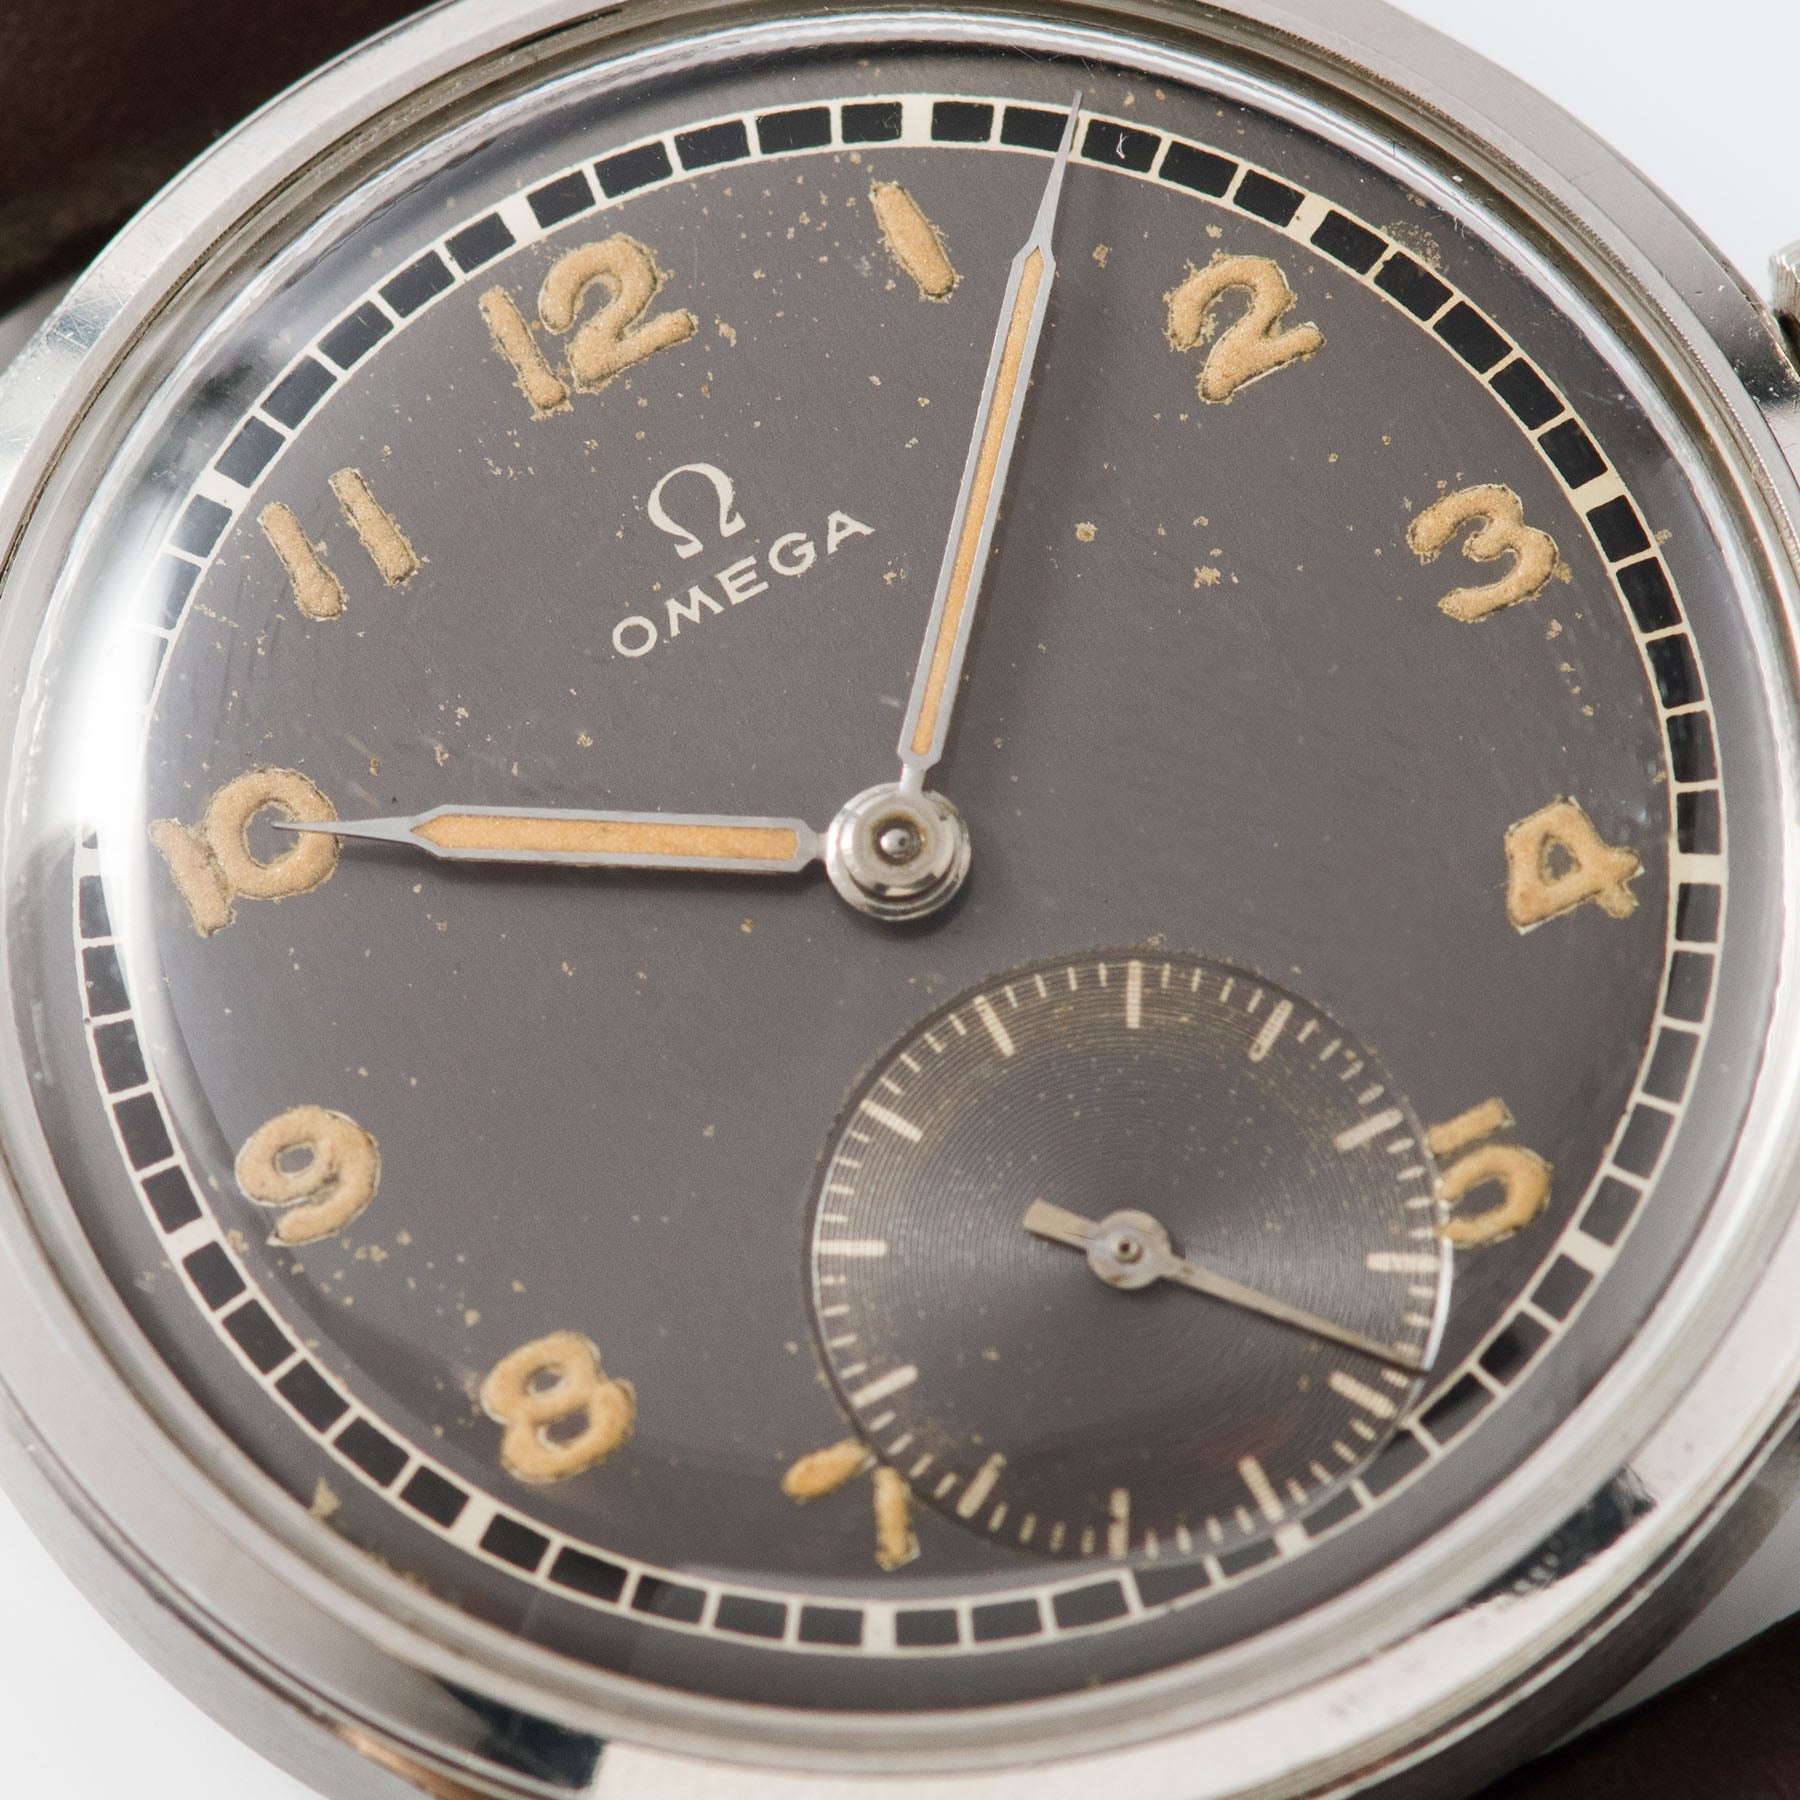 Omega Suveran Reference 2400-1 Dress Watch 1940s